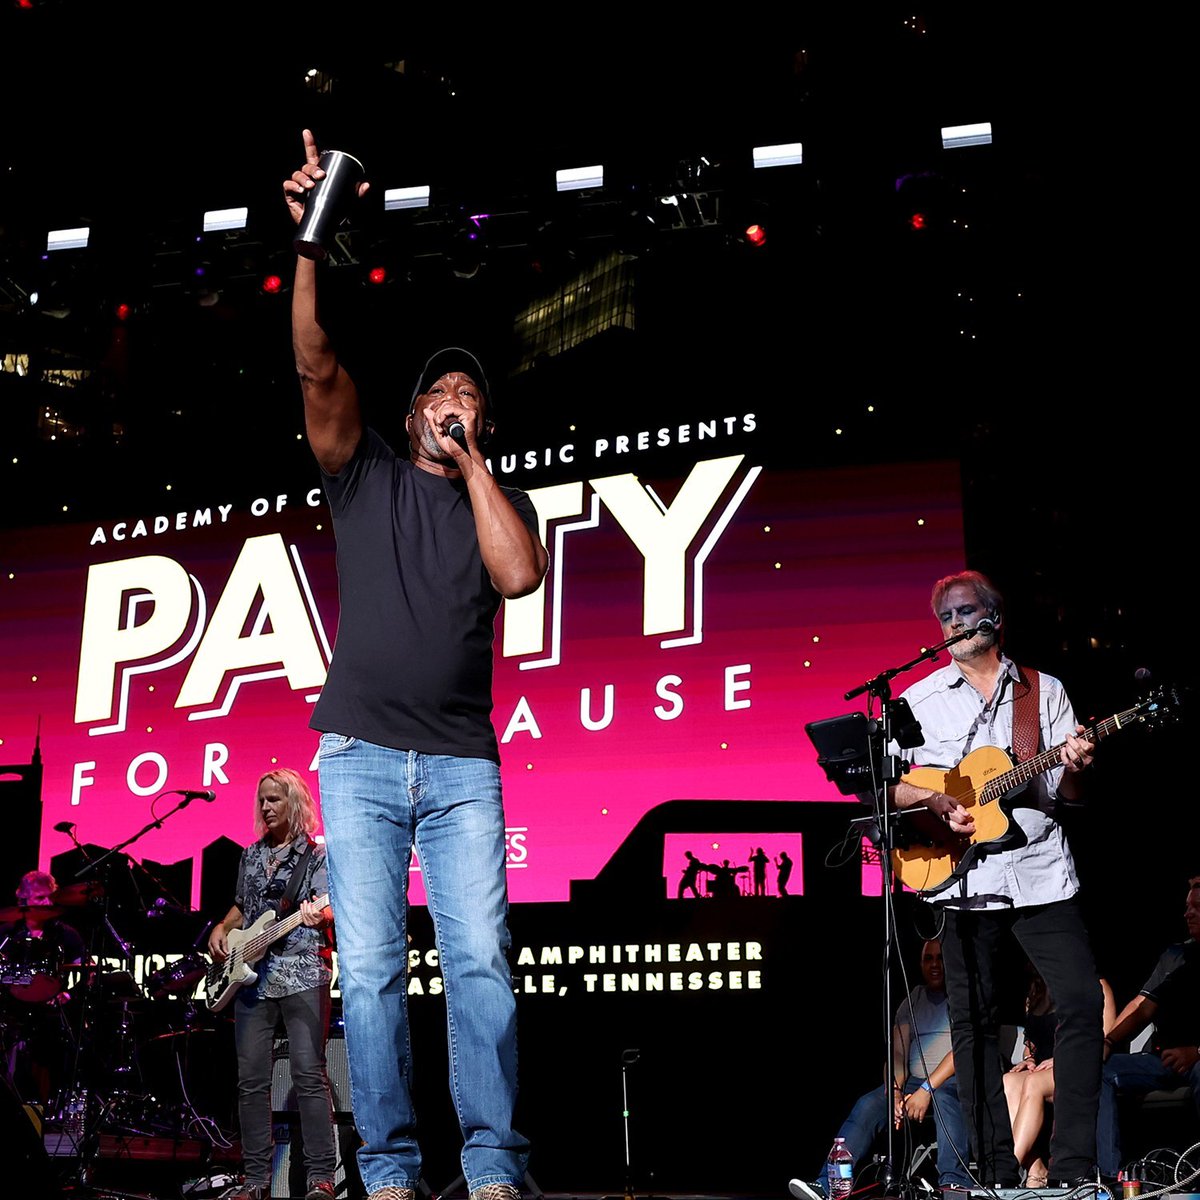 What a night!! Thank you to everyone who came out for #ACM's Party For A Cause to benefit #ACMLiftingLives. Cheers!